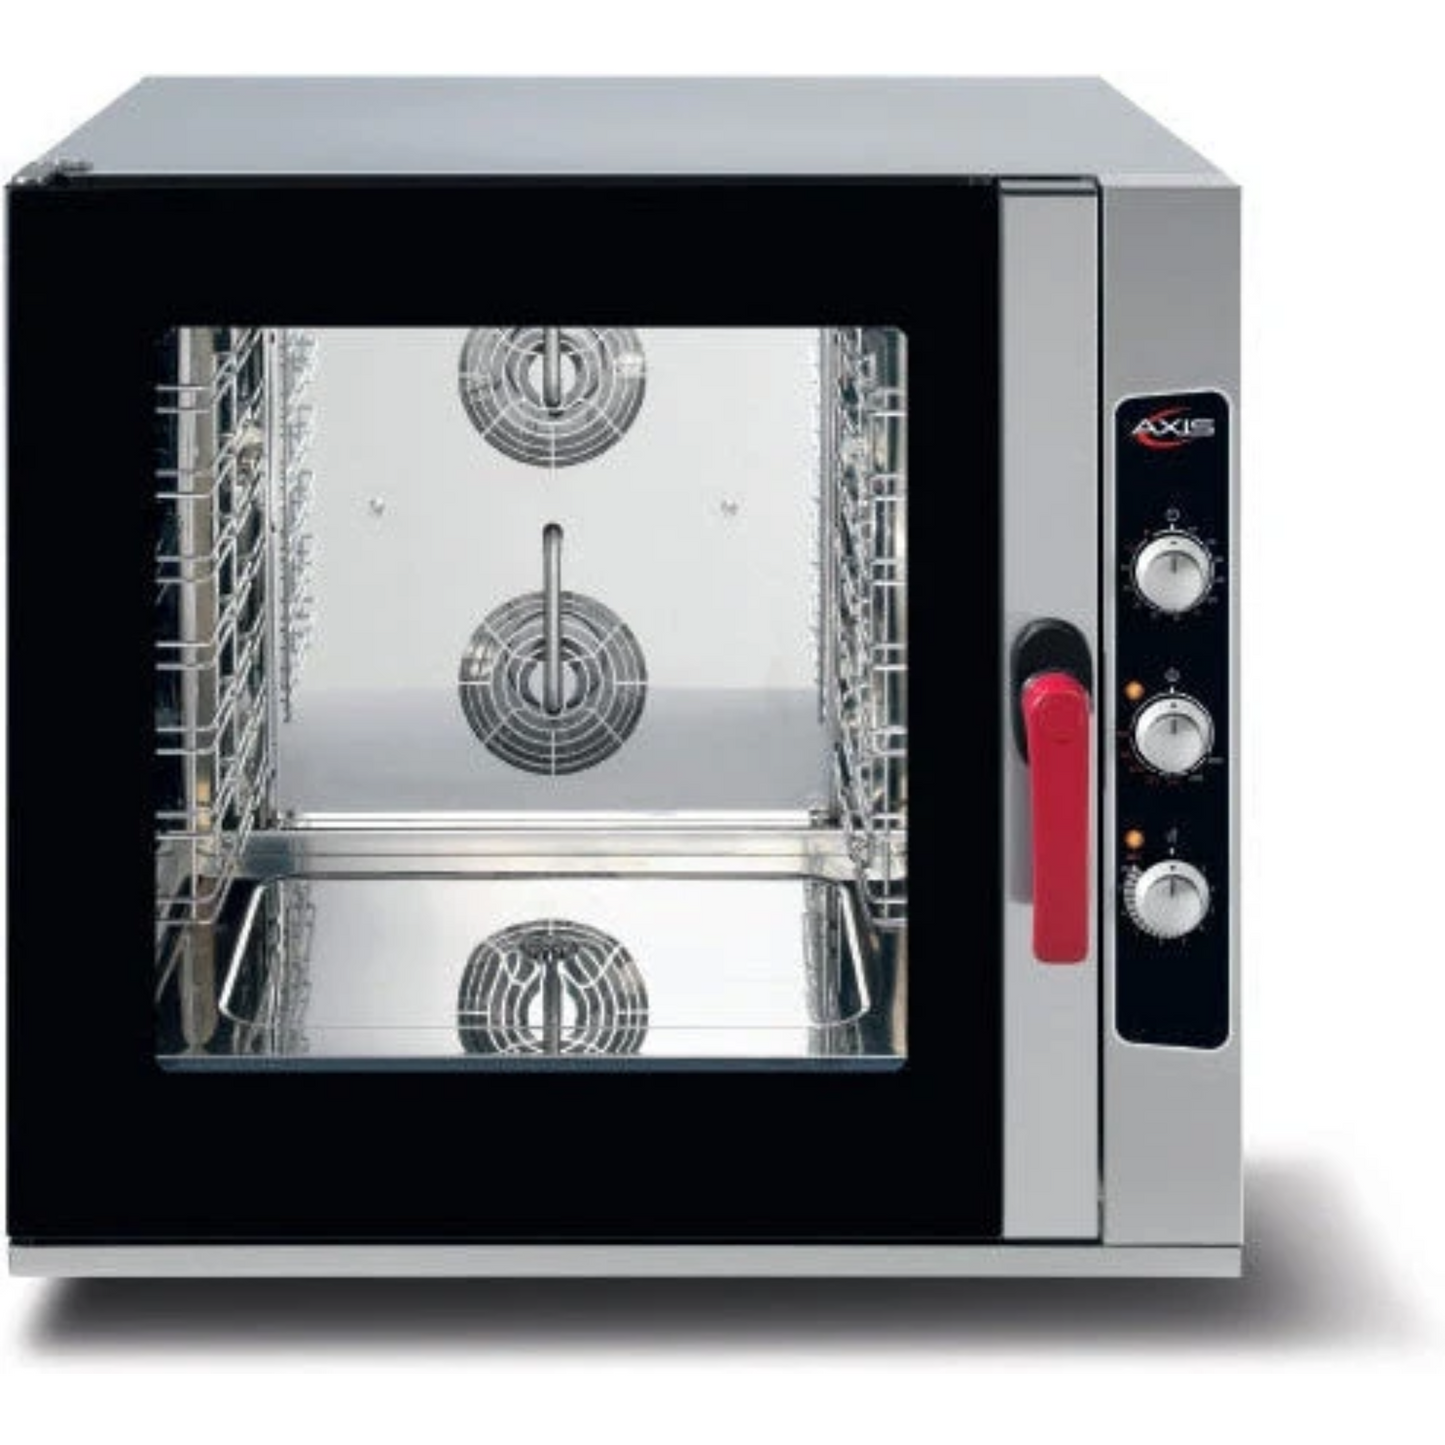 Axis AX-CL06M Electric Combi Oven with Manual Controls 6 Pan Capacity Full-Size